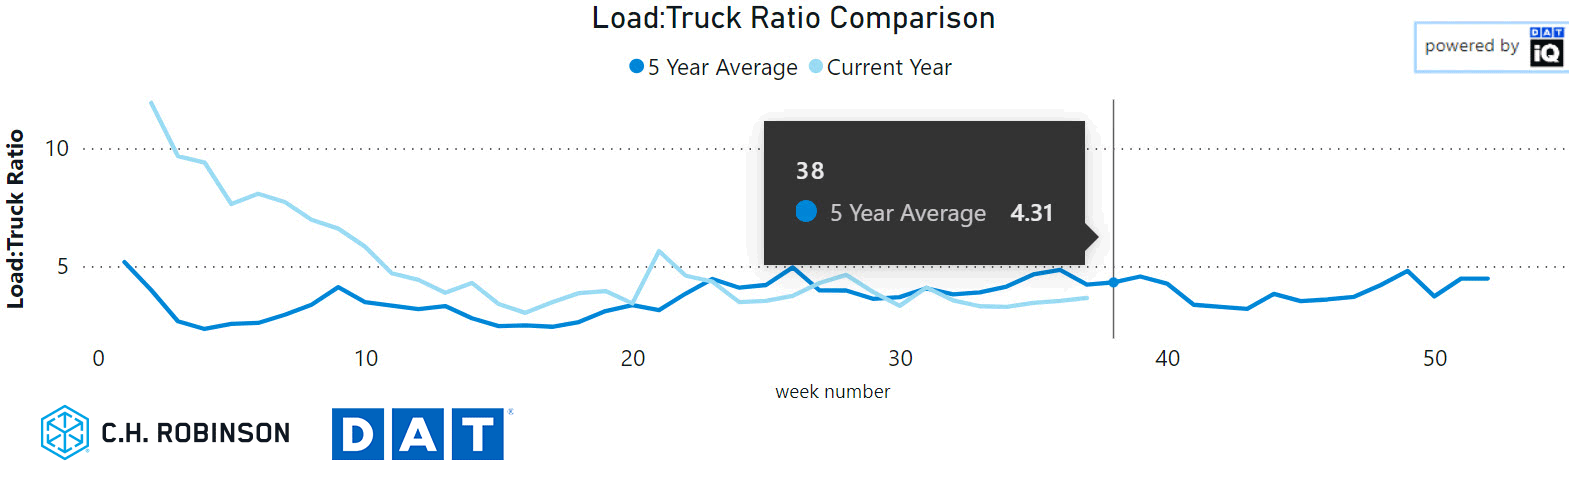 dryvan load:truck ratio 5 year comparrison 